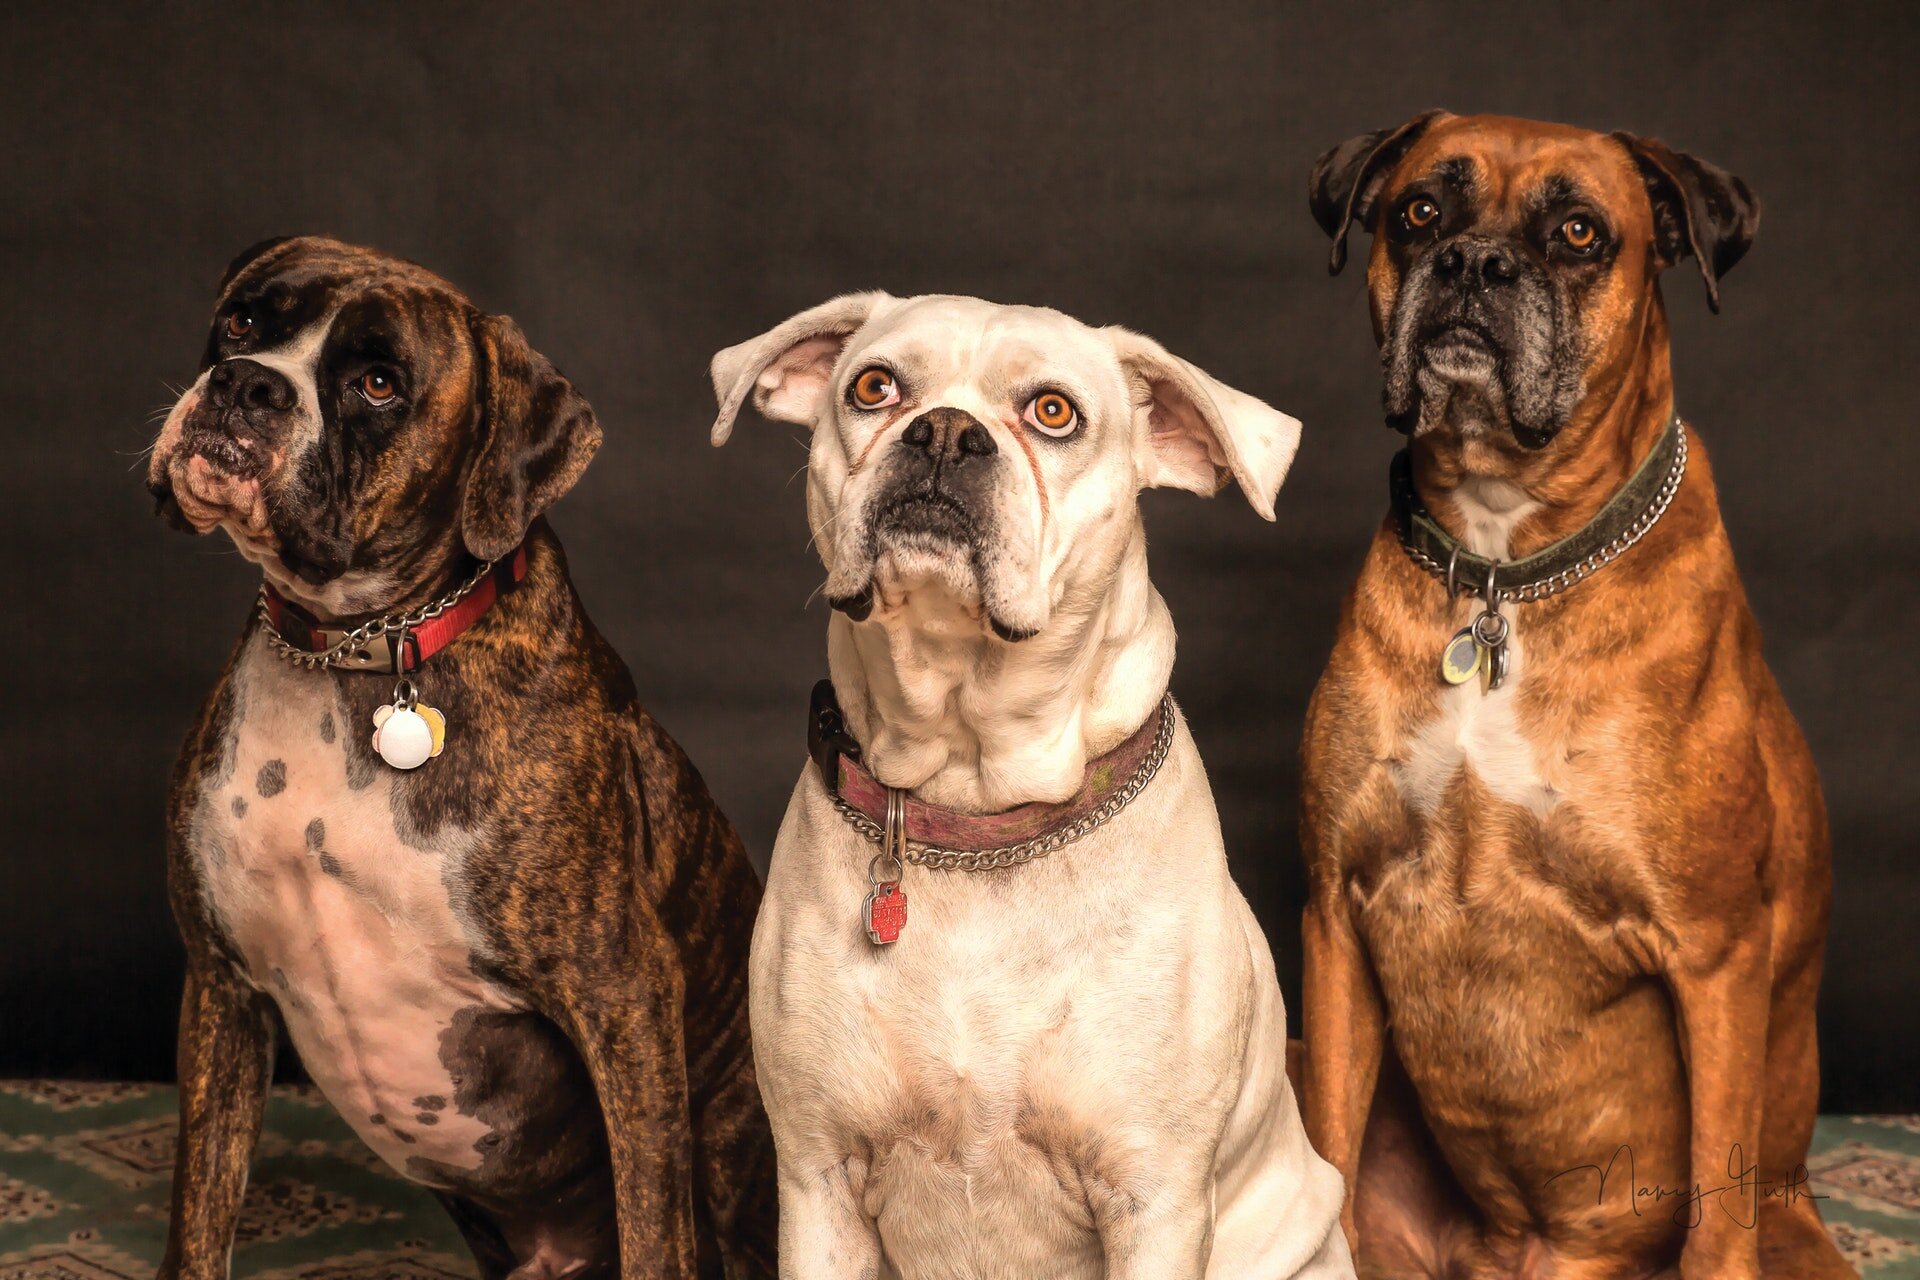 Three Boxer dogs staring intently